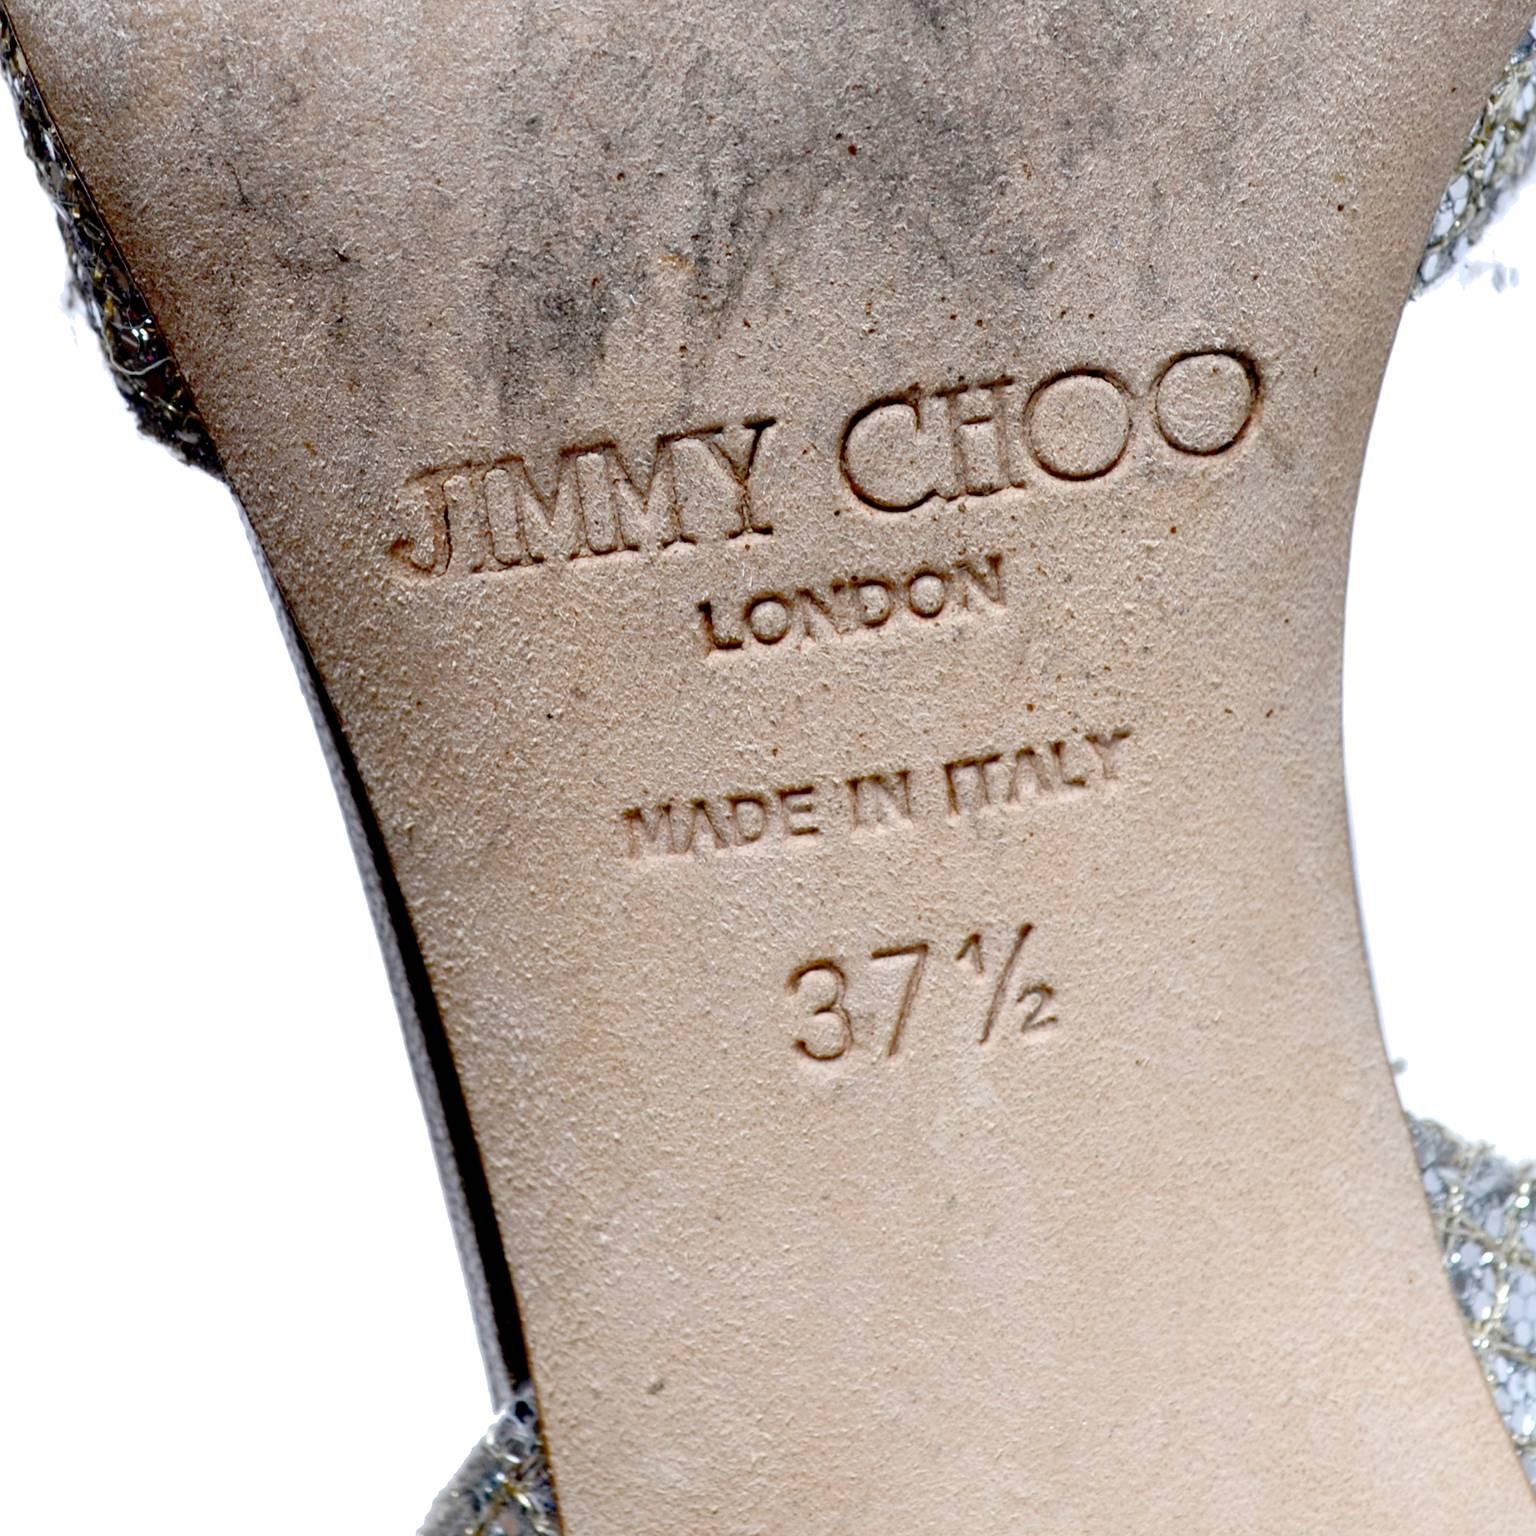 Jimmy Choo Shoes D'Orsay Pumps in Glitter Champagne Size 37.5 W/ Box ...